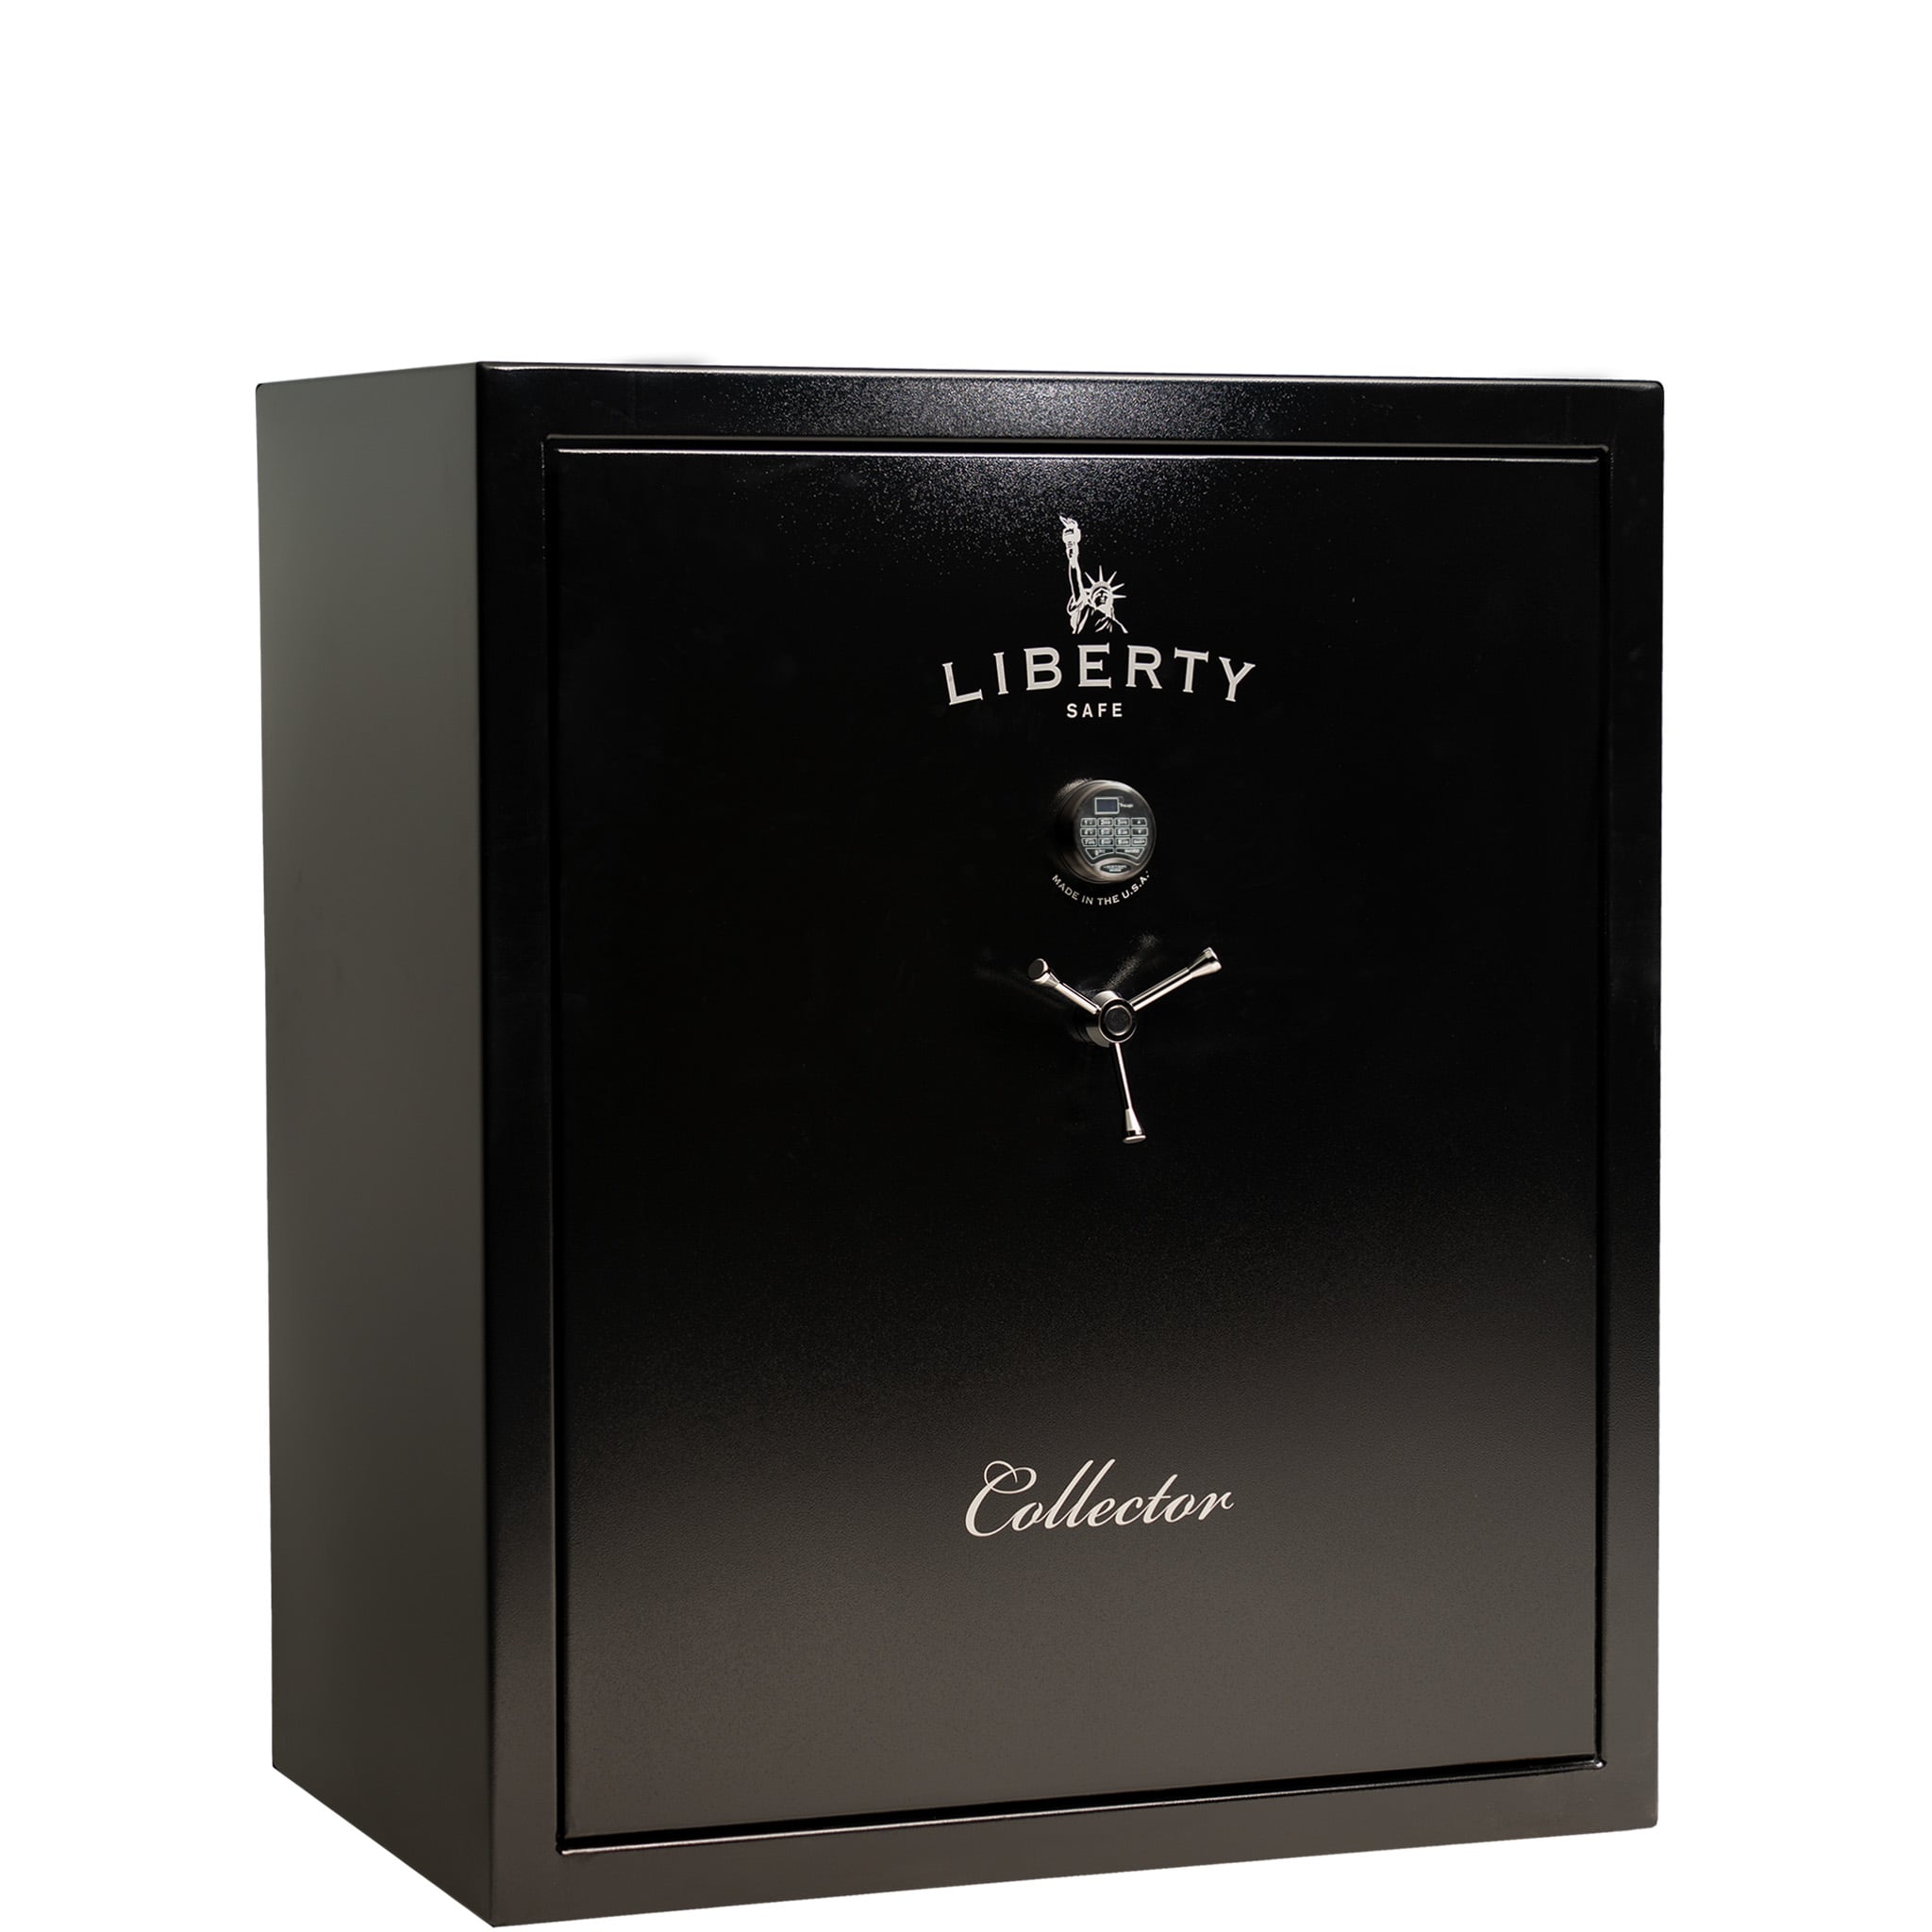 Liberty Collector 72 Gun Safe with Electronic Lock, image 1 